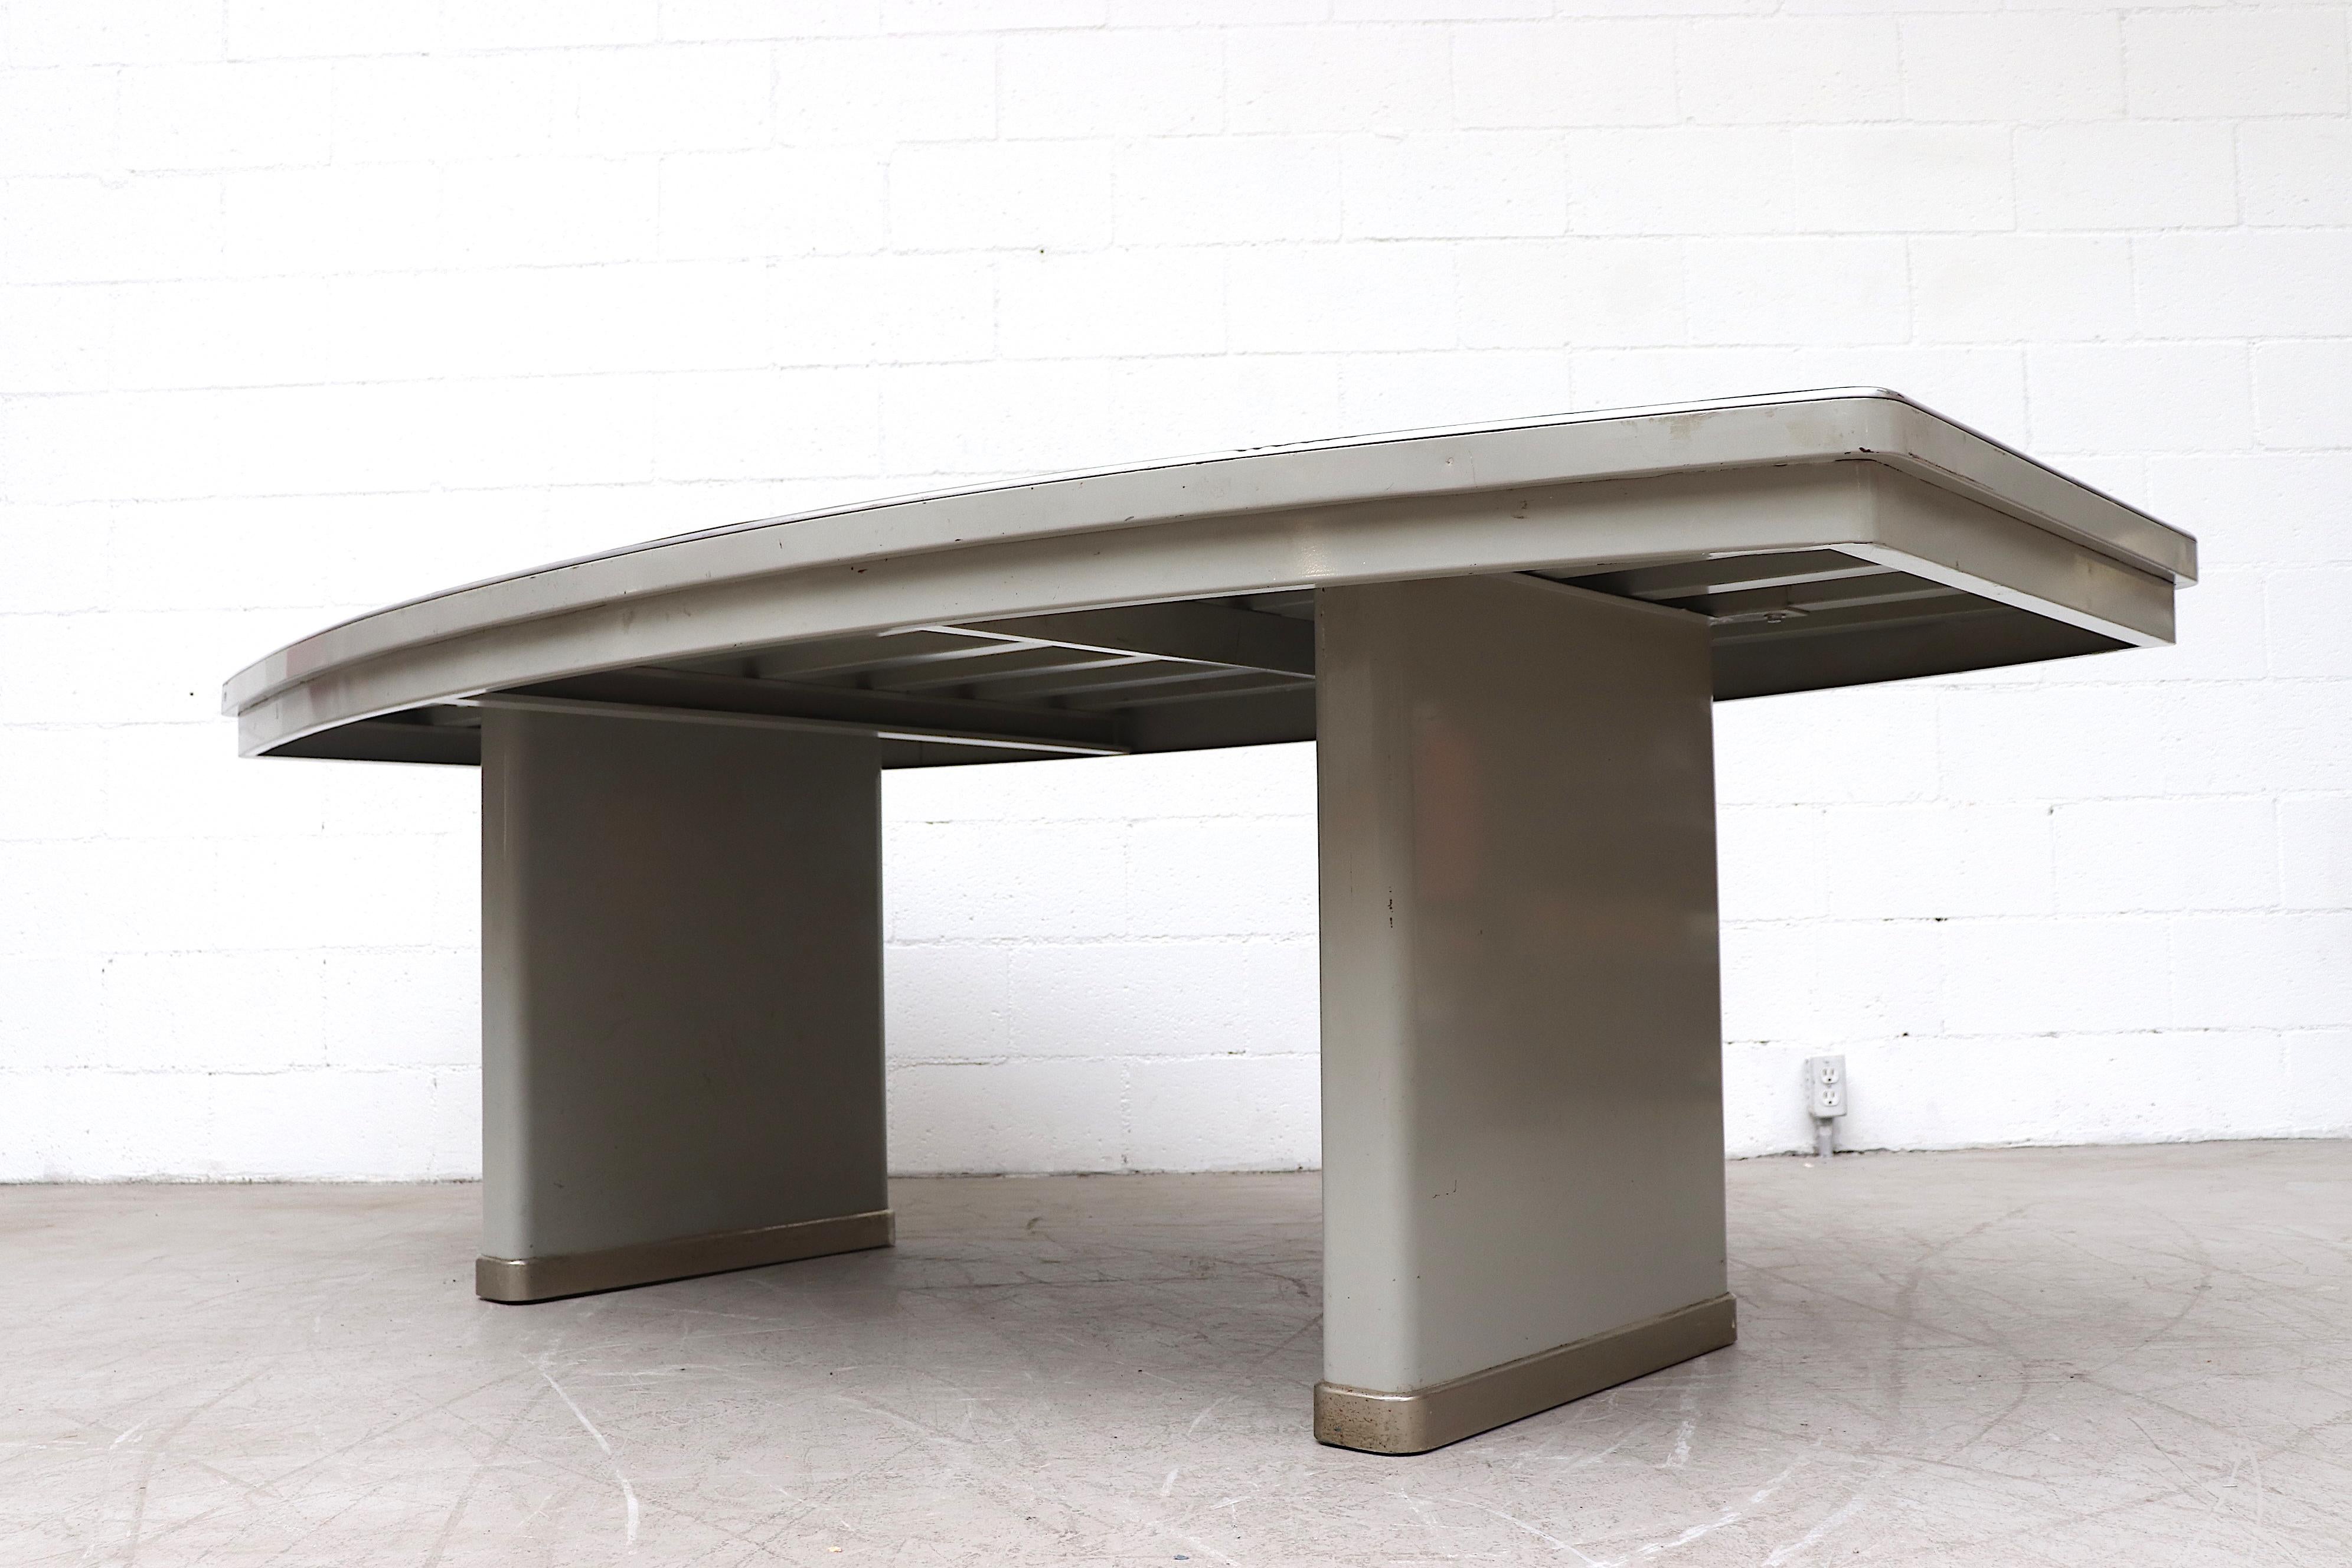 Impressive industrial conference table by Lips with grey enameled metal frame, bowed dark grey linoleum top with metal trim and large metal legs. In original condition with visible wear and scratching, including some denting to the metal edge.